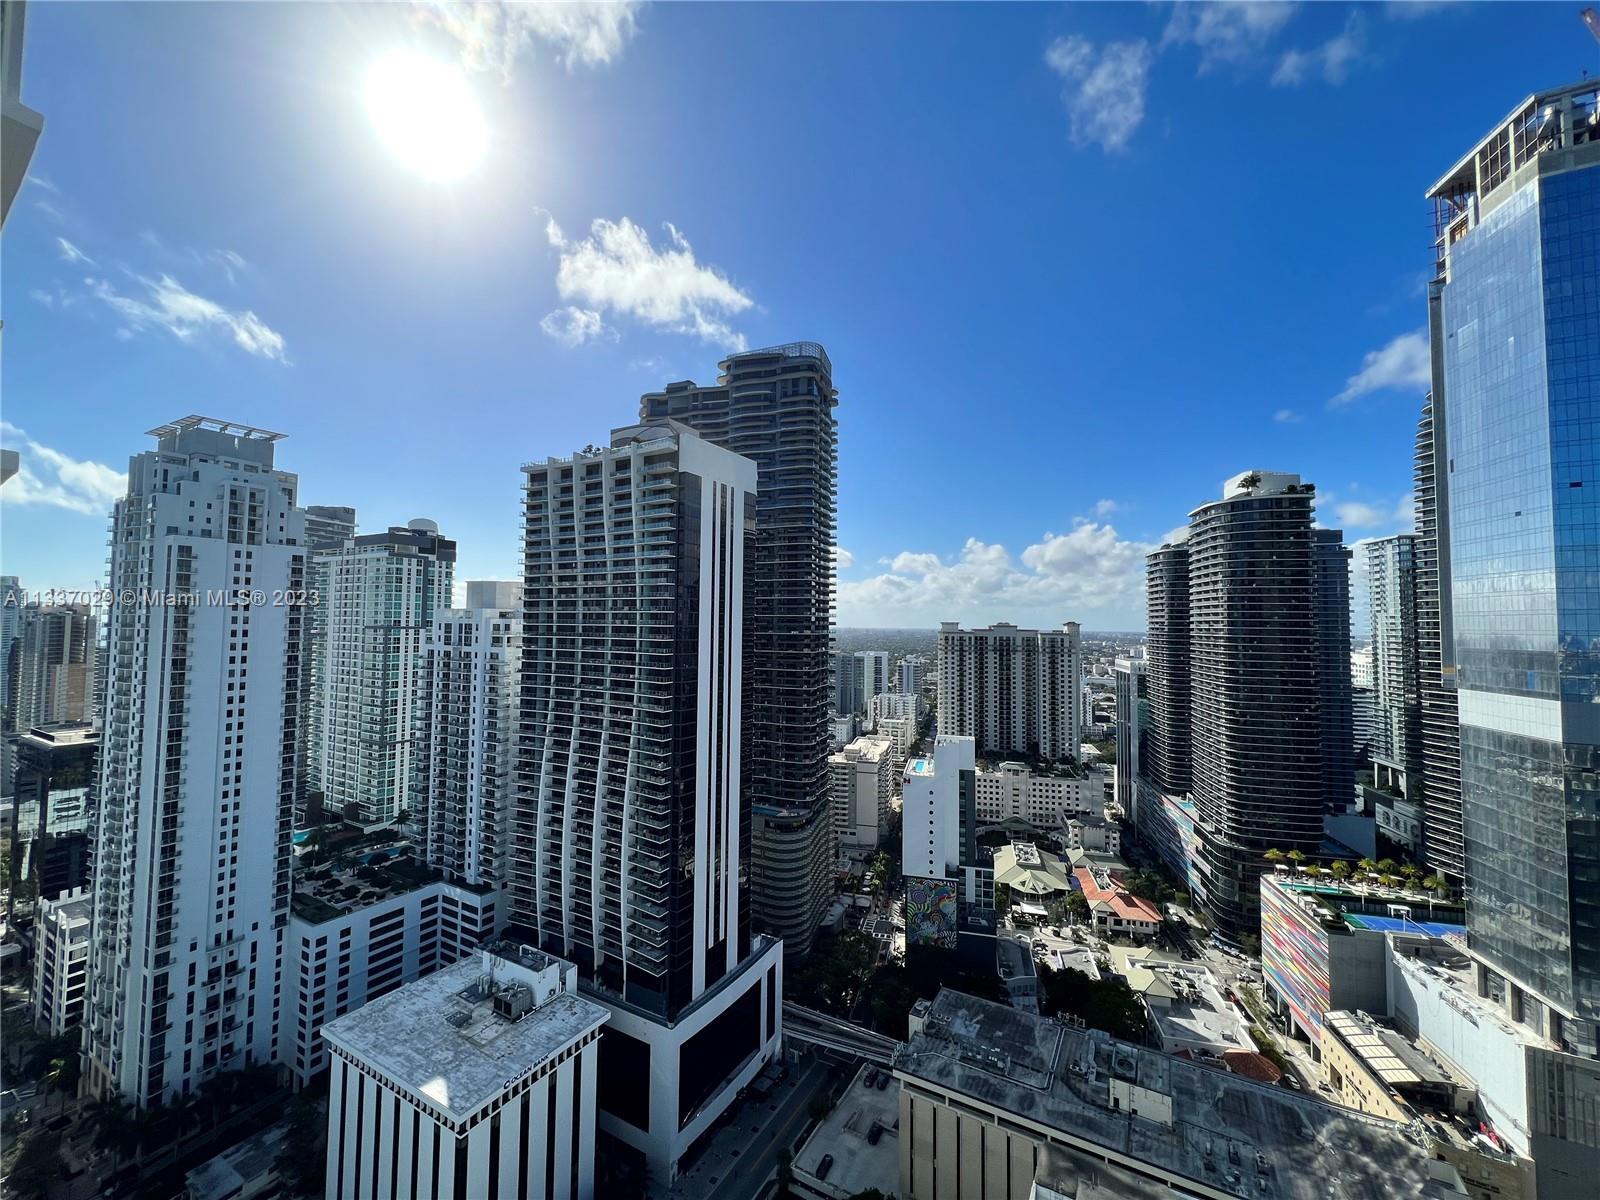 BEST UNIT IN THE HEART OF BRICKELL AT PLAZA. The unit has great views. Upgraded condo with porcelain flooring, built in closets, backsplash designs in kitchen and more! Highly desirable building, The Plaza on Brickell building features two swimming pools, hot tub spa, fitness center, club room, theater & business center.